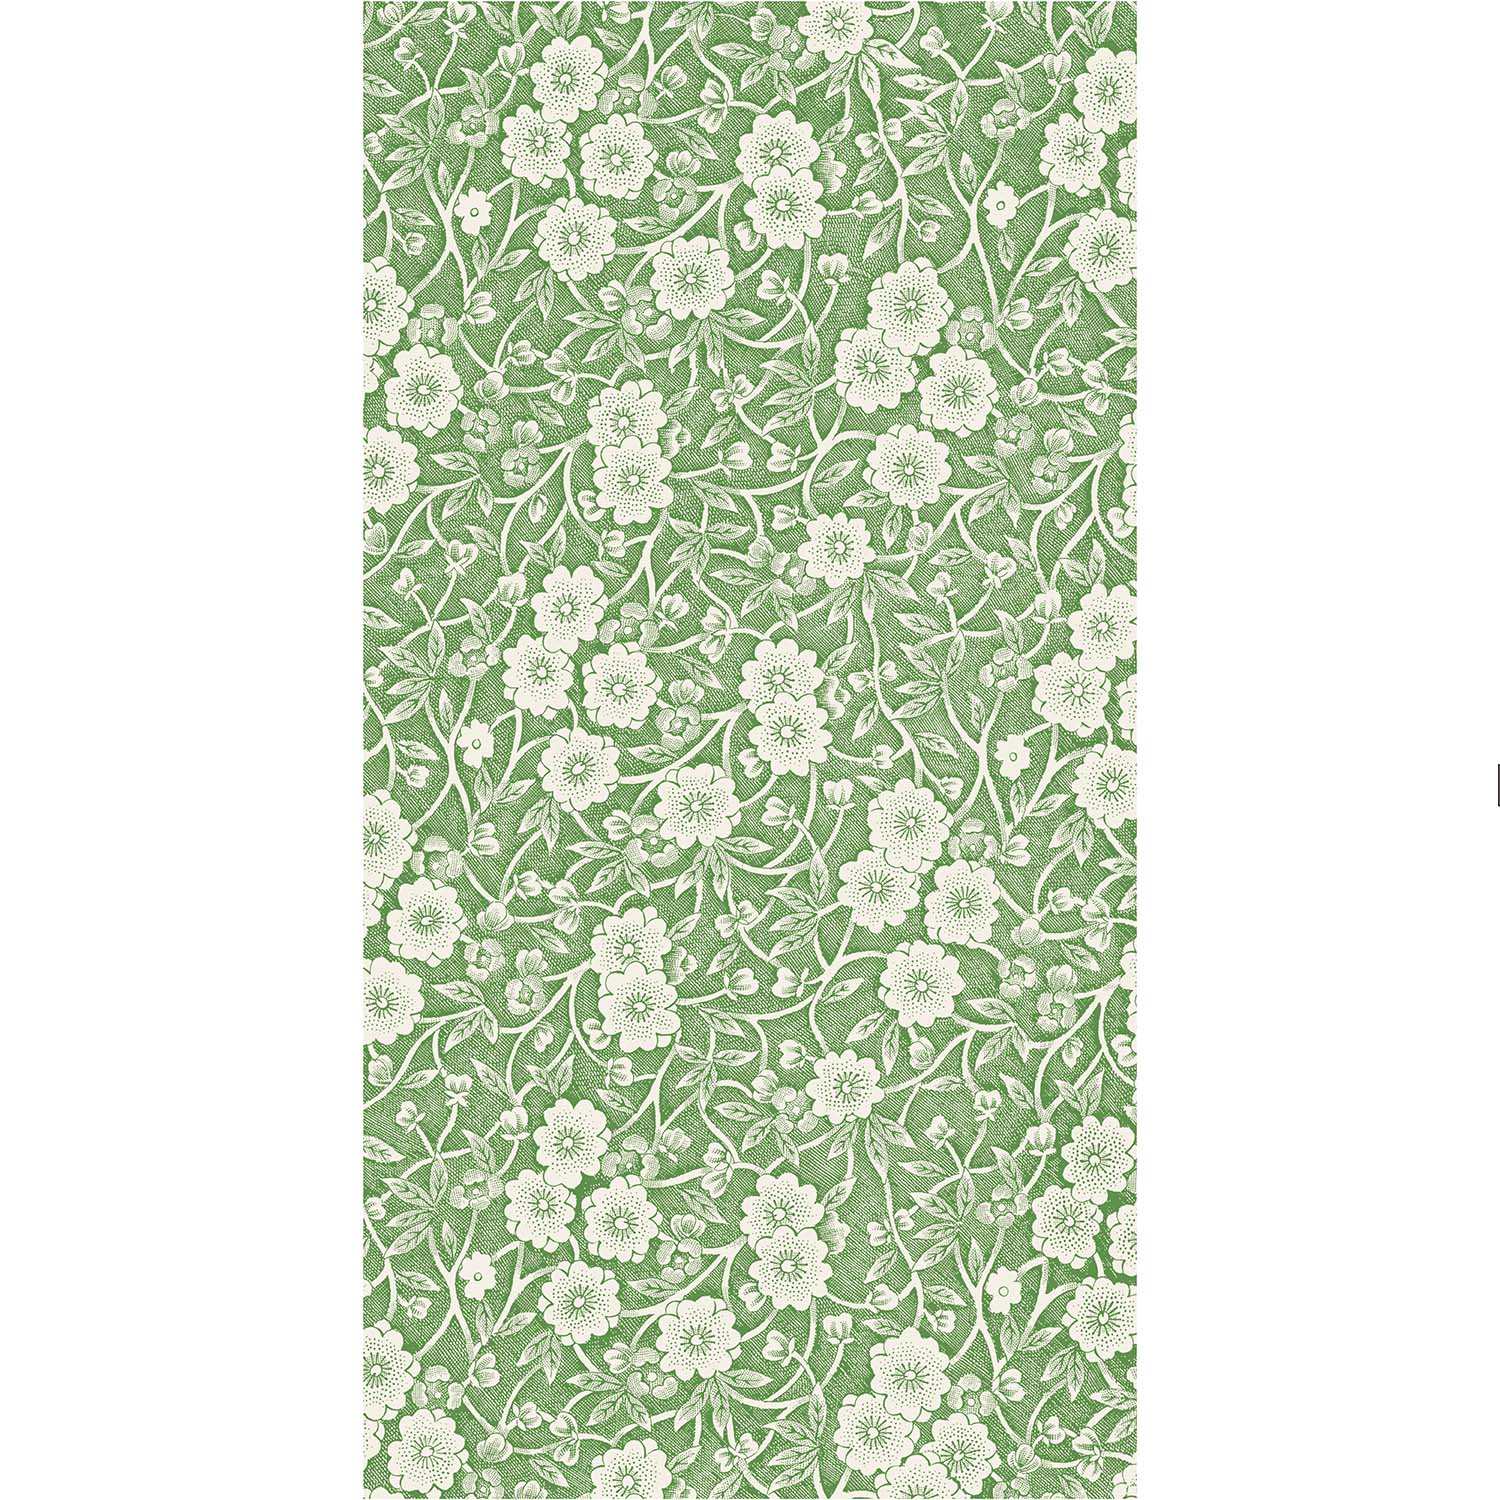 A collection of Green Calico napkins by Hester &amp; Cook, with a green and white floral pattern on a white background.